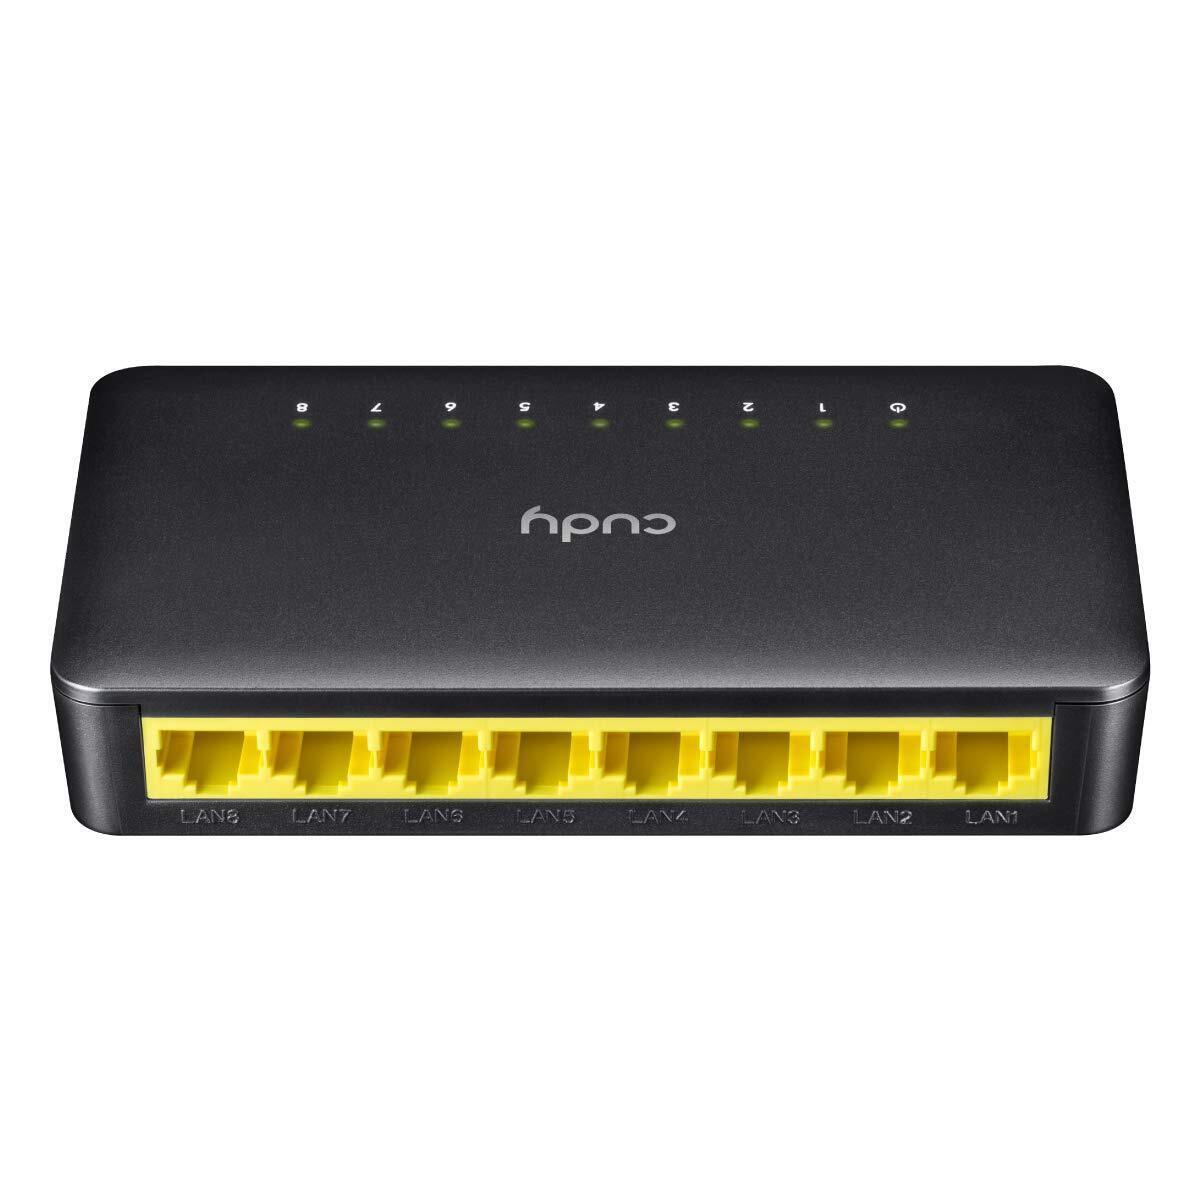 Cudy 8 Port Fast Ethernet Switch   Ethernet Splitter   Network Switch   Plug and